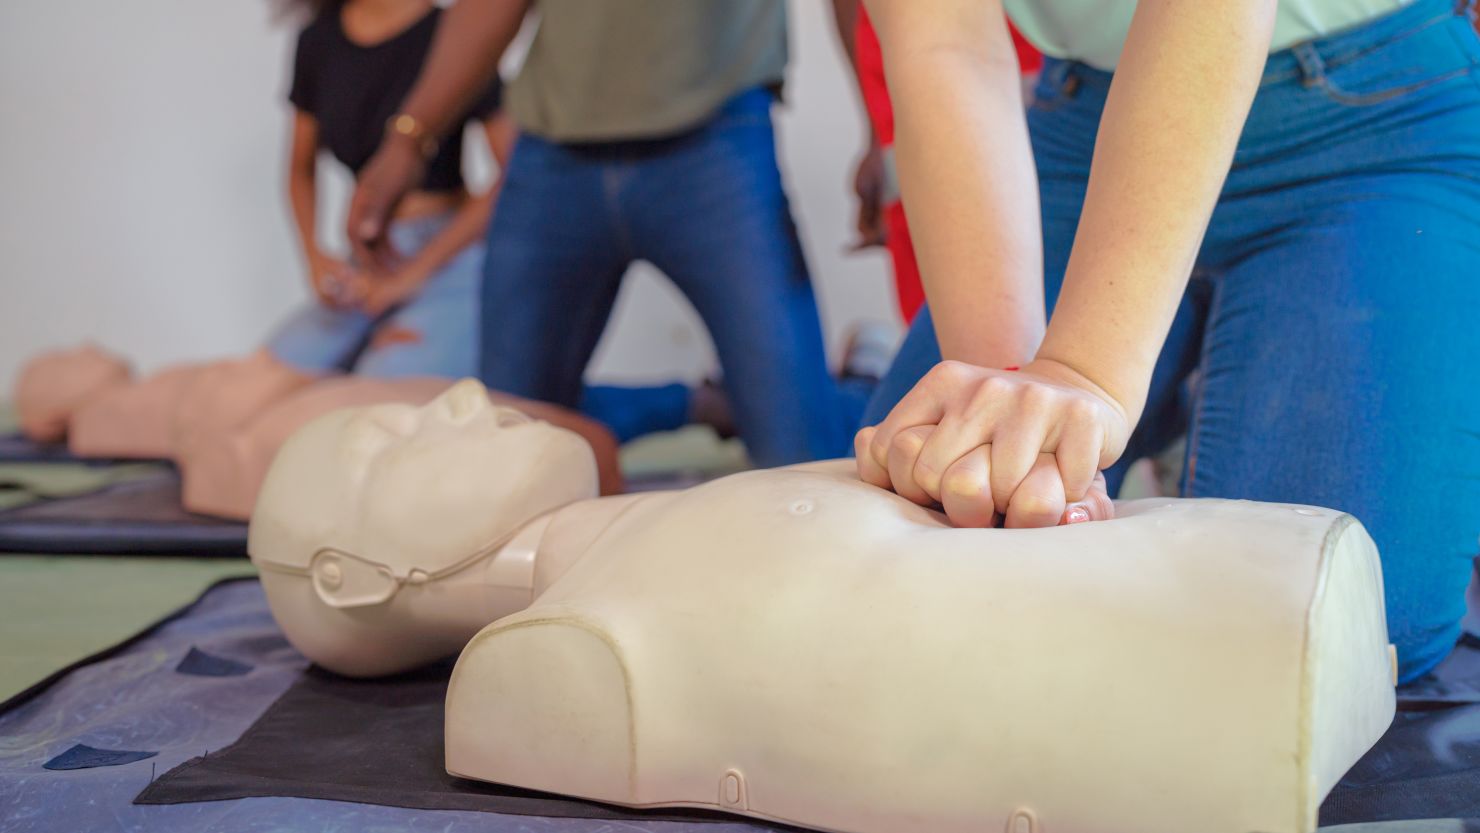 Hands Of A trainee doing chest compression during defibrillator CPR Training. - stock photo